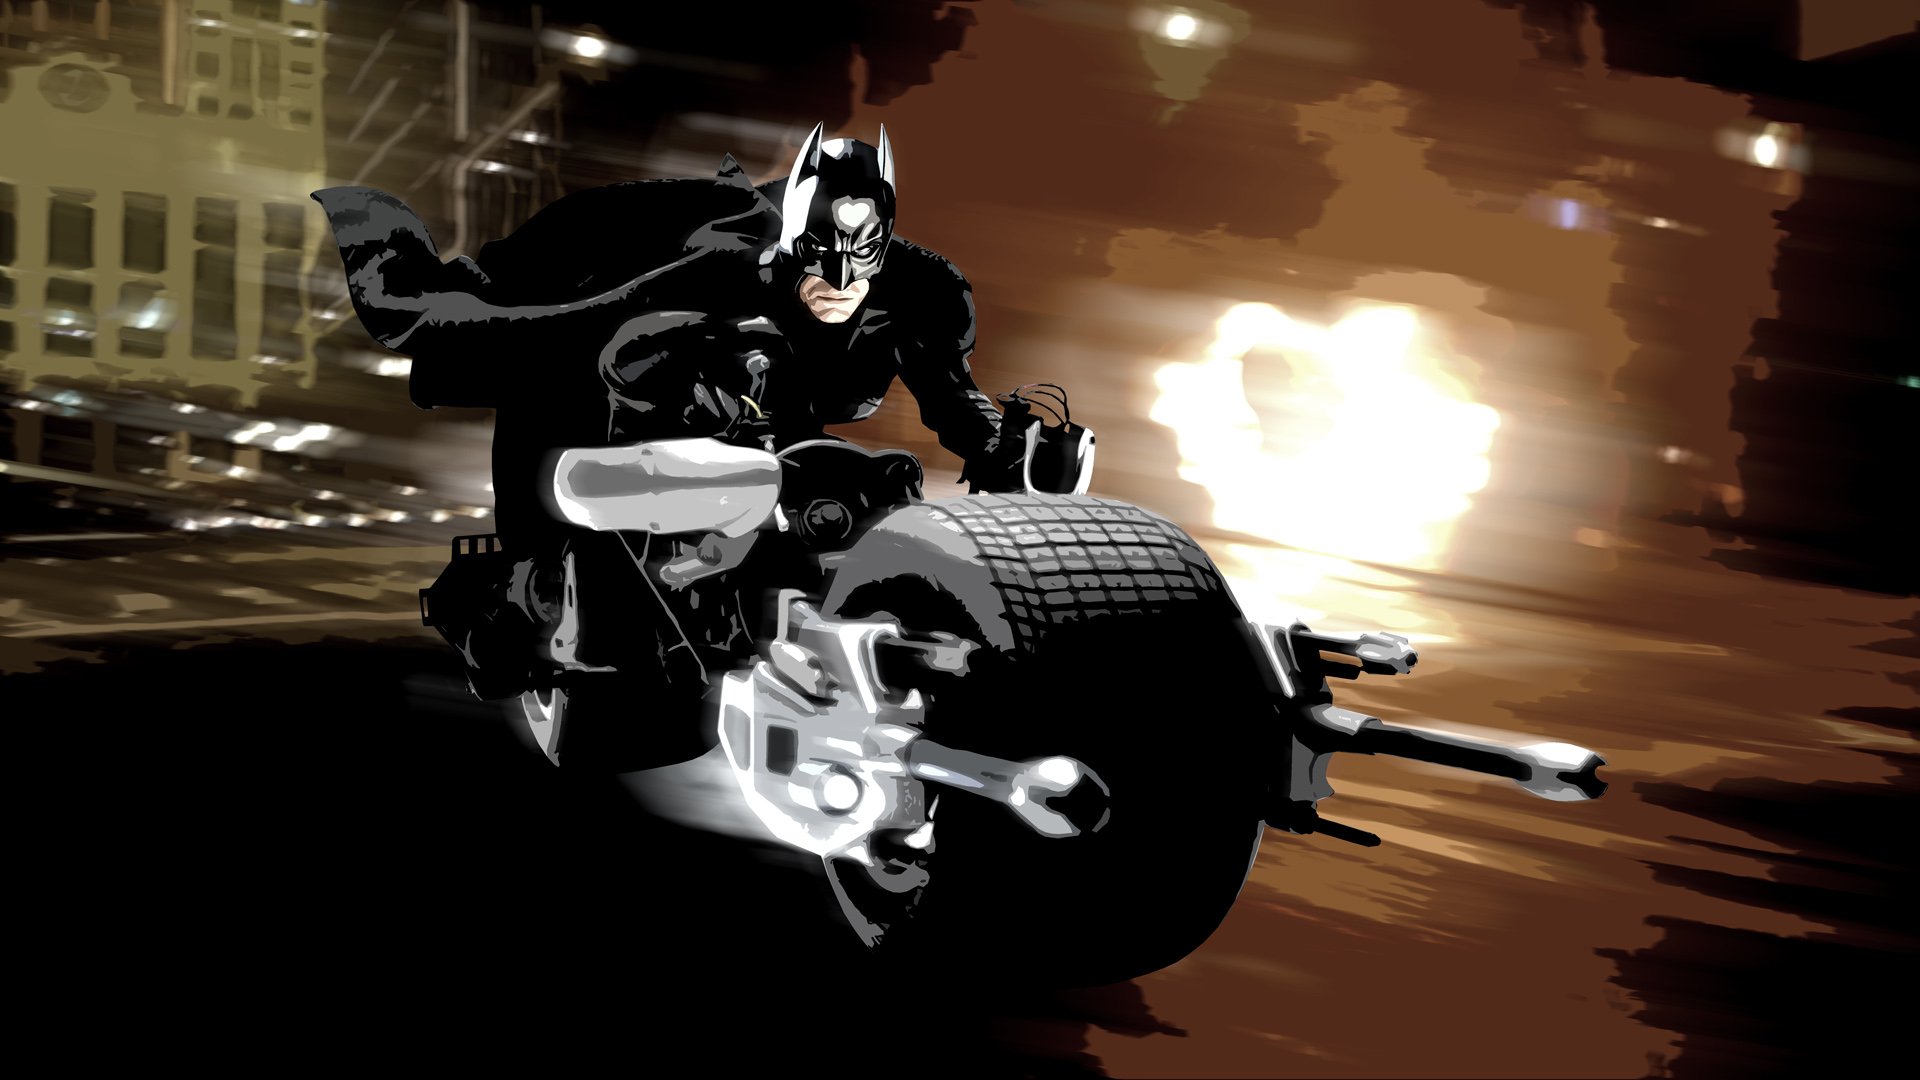 The Dark Knight download the last version for mac